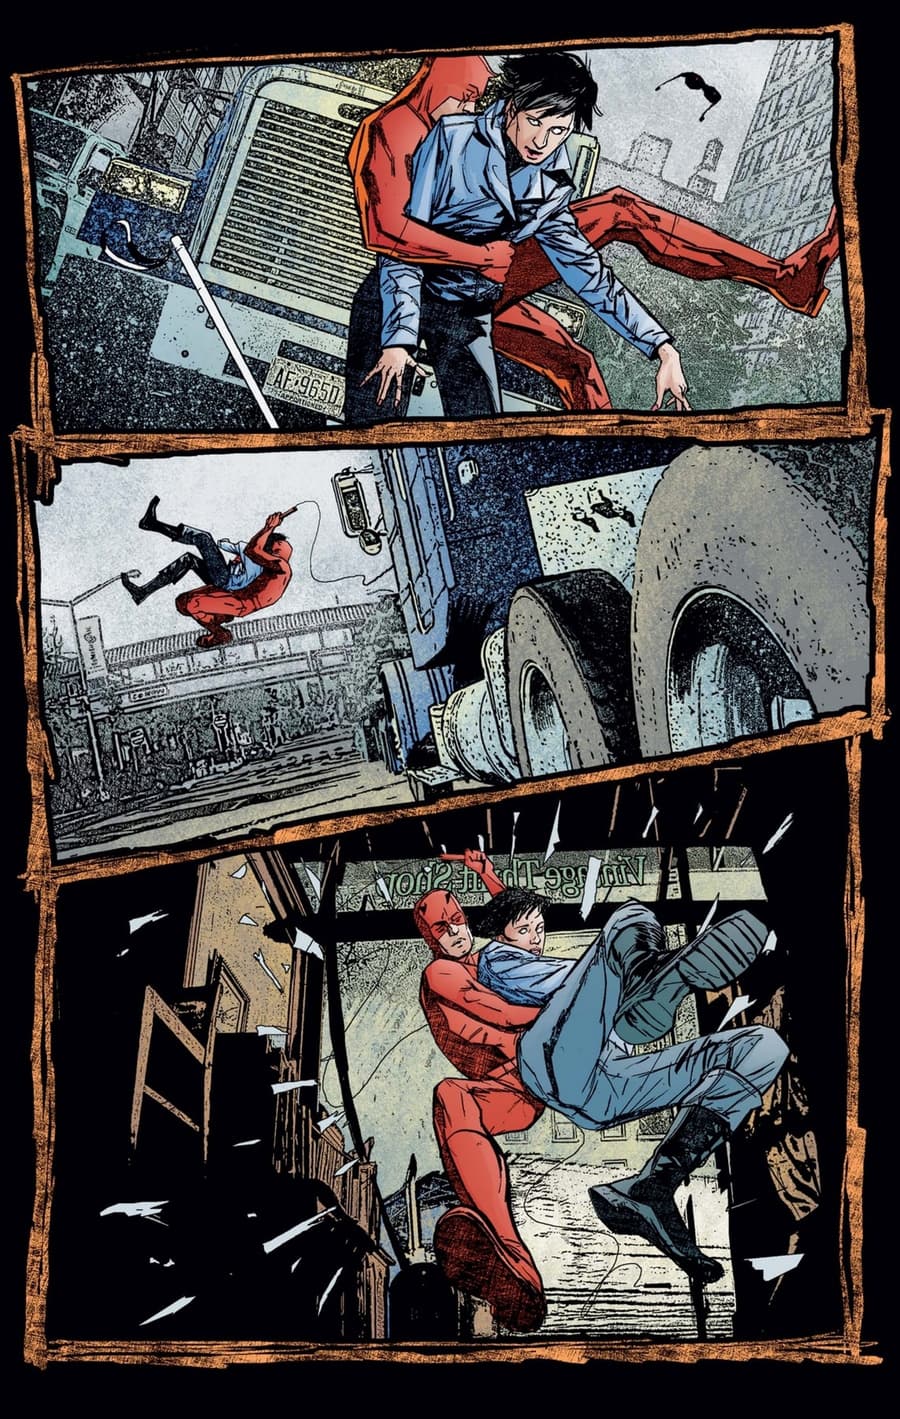 DAREDEVIL (1998) #41 page by Brian Michael Bendis and Alex Maleev